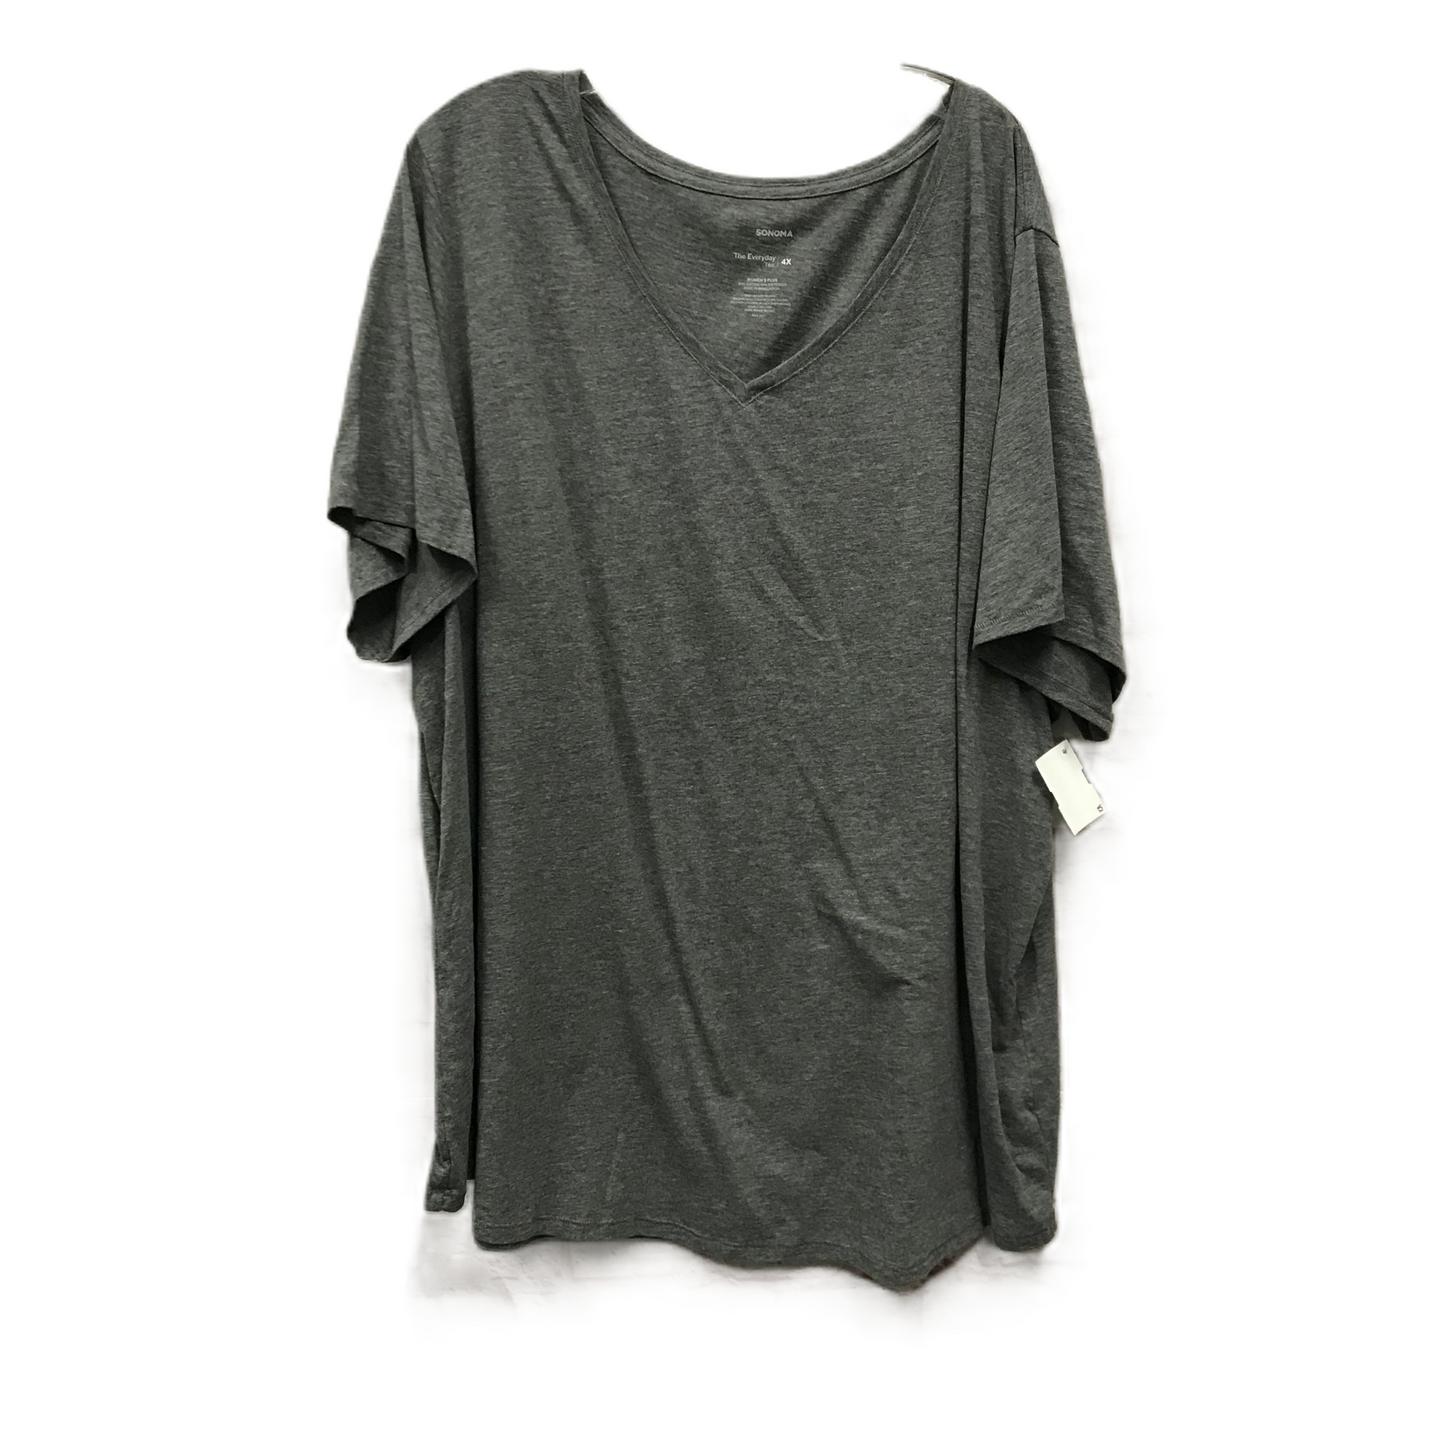 Grey Top Short Sleeve Basic By Sonoma, Size: 4x